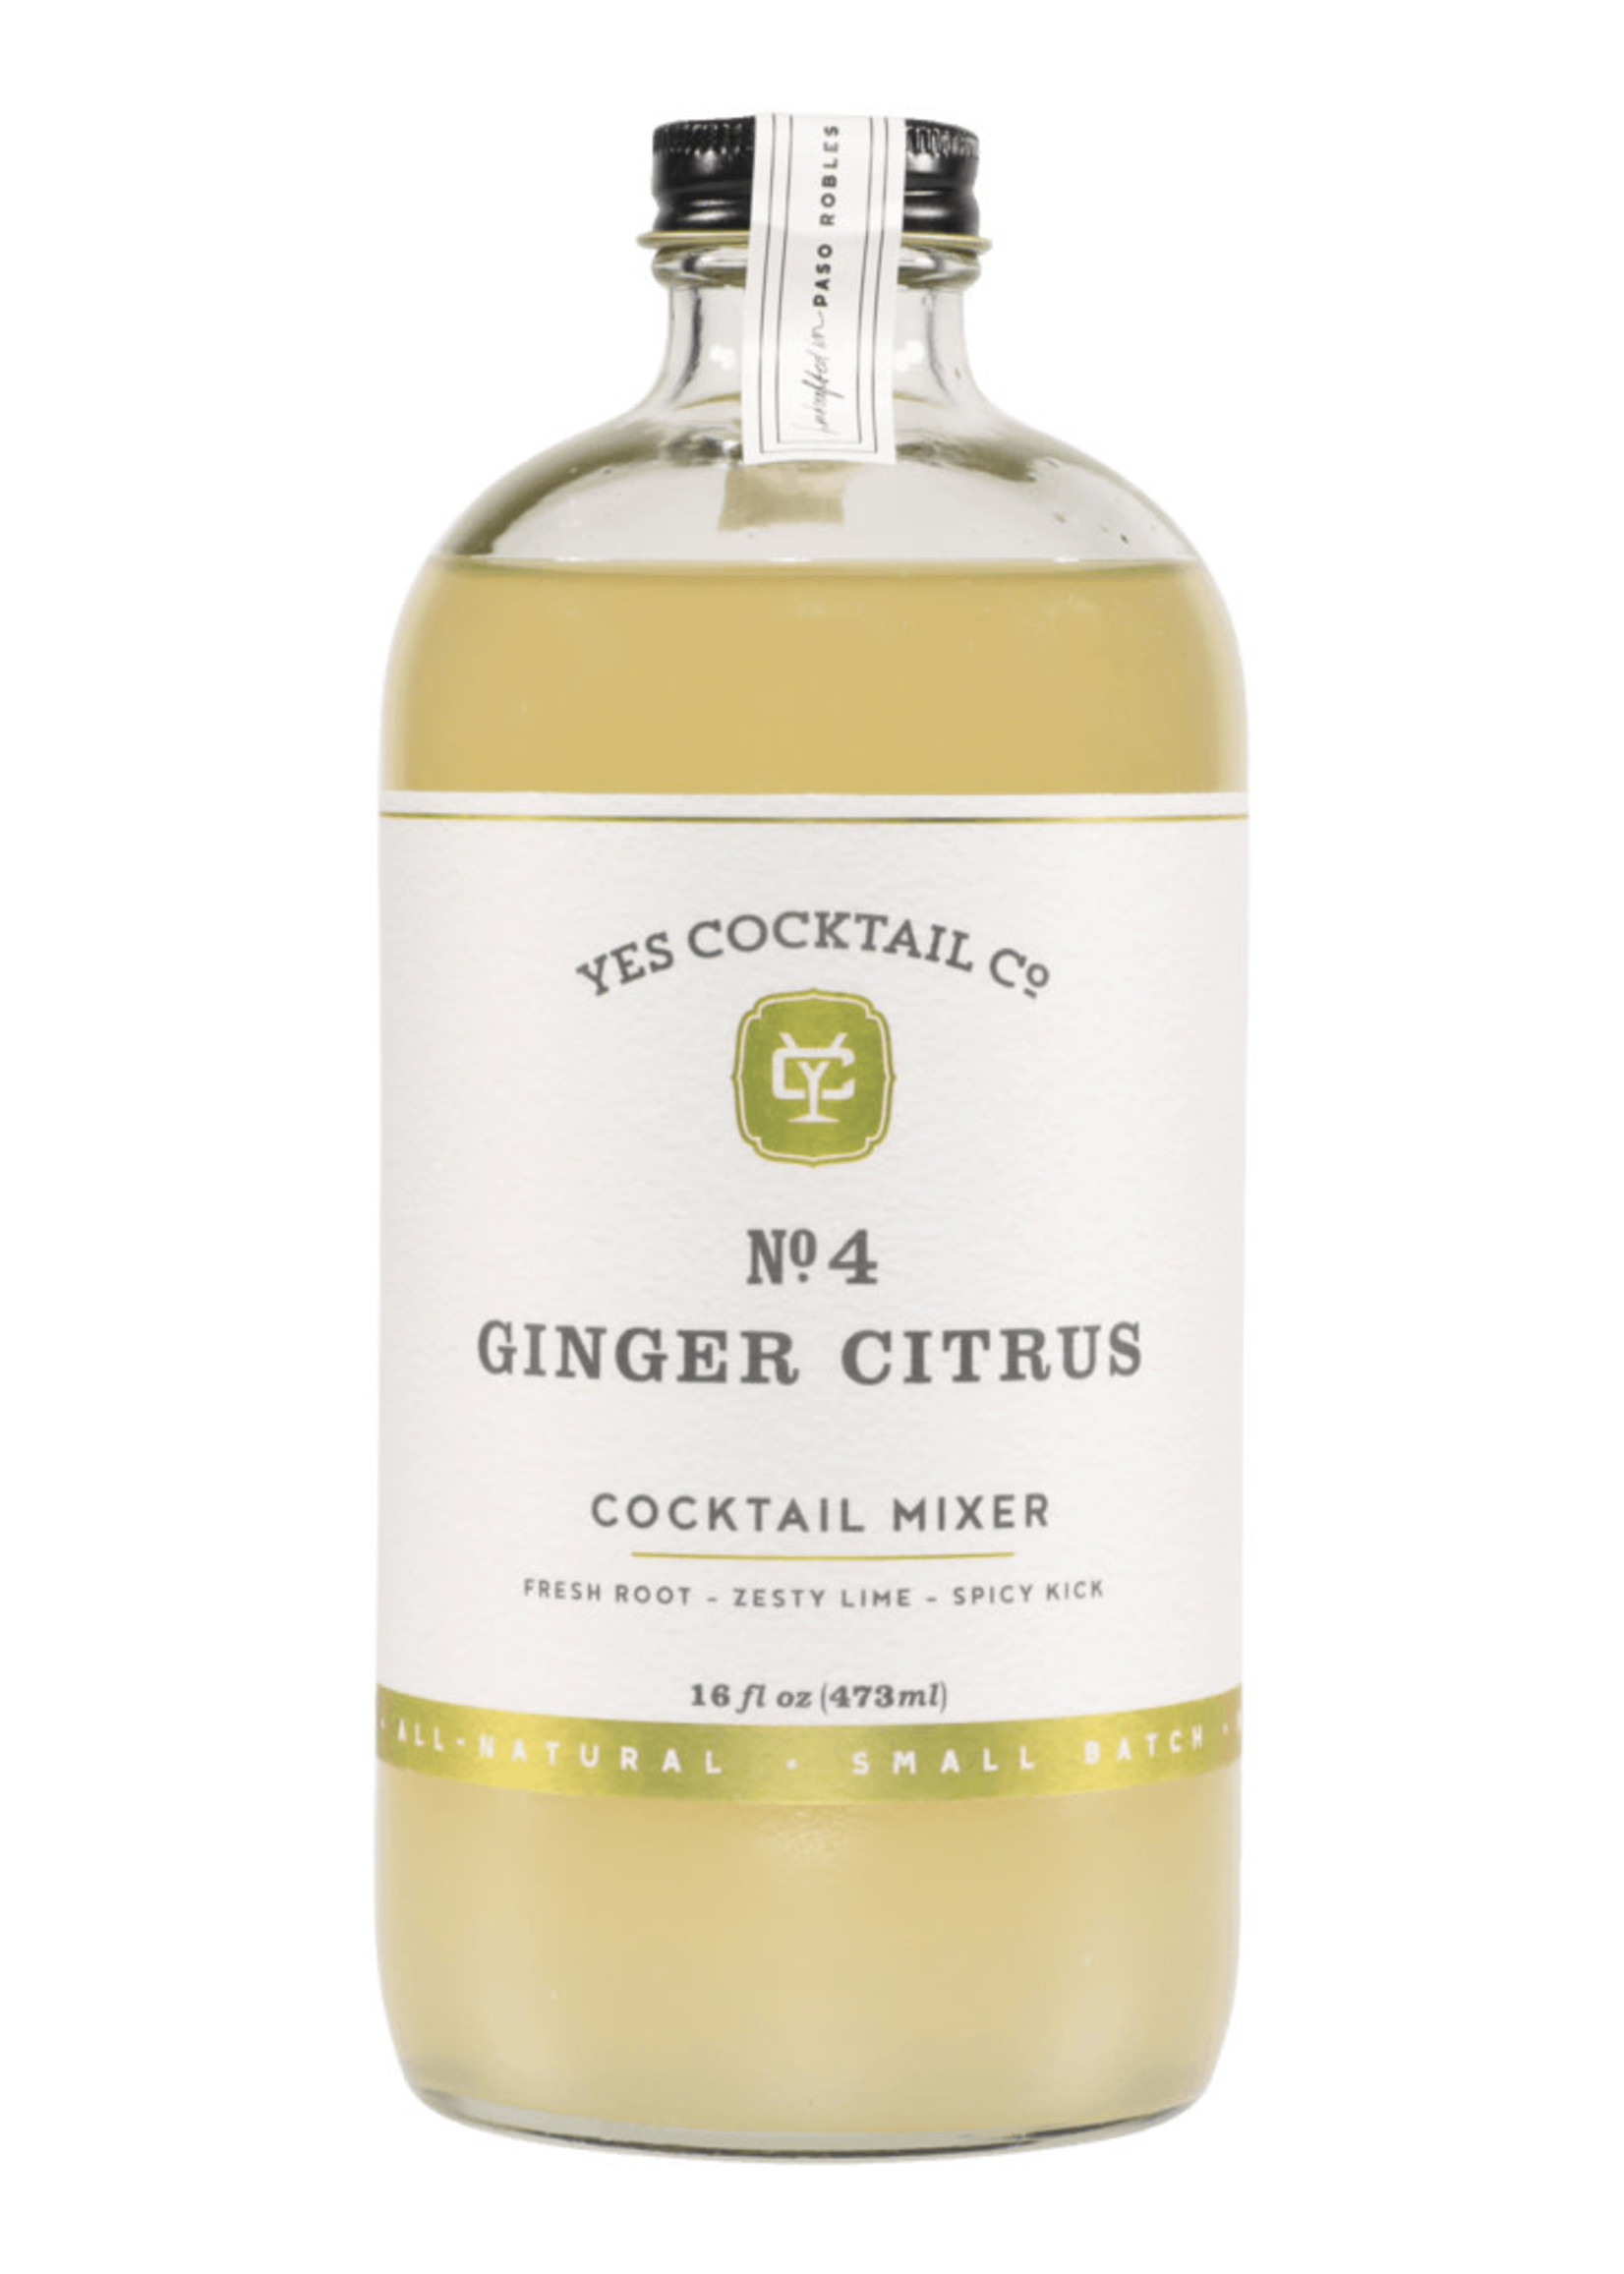 Yes Cocktail Co Yes Cocktail Co, No. 4 Ginger Citrus Cocktail Mixer, 16oz